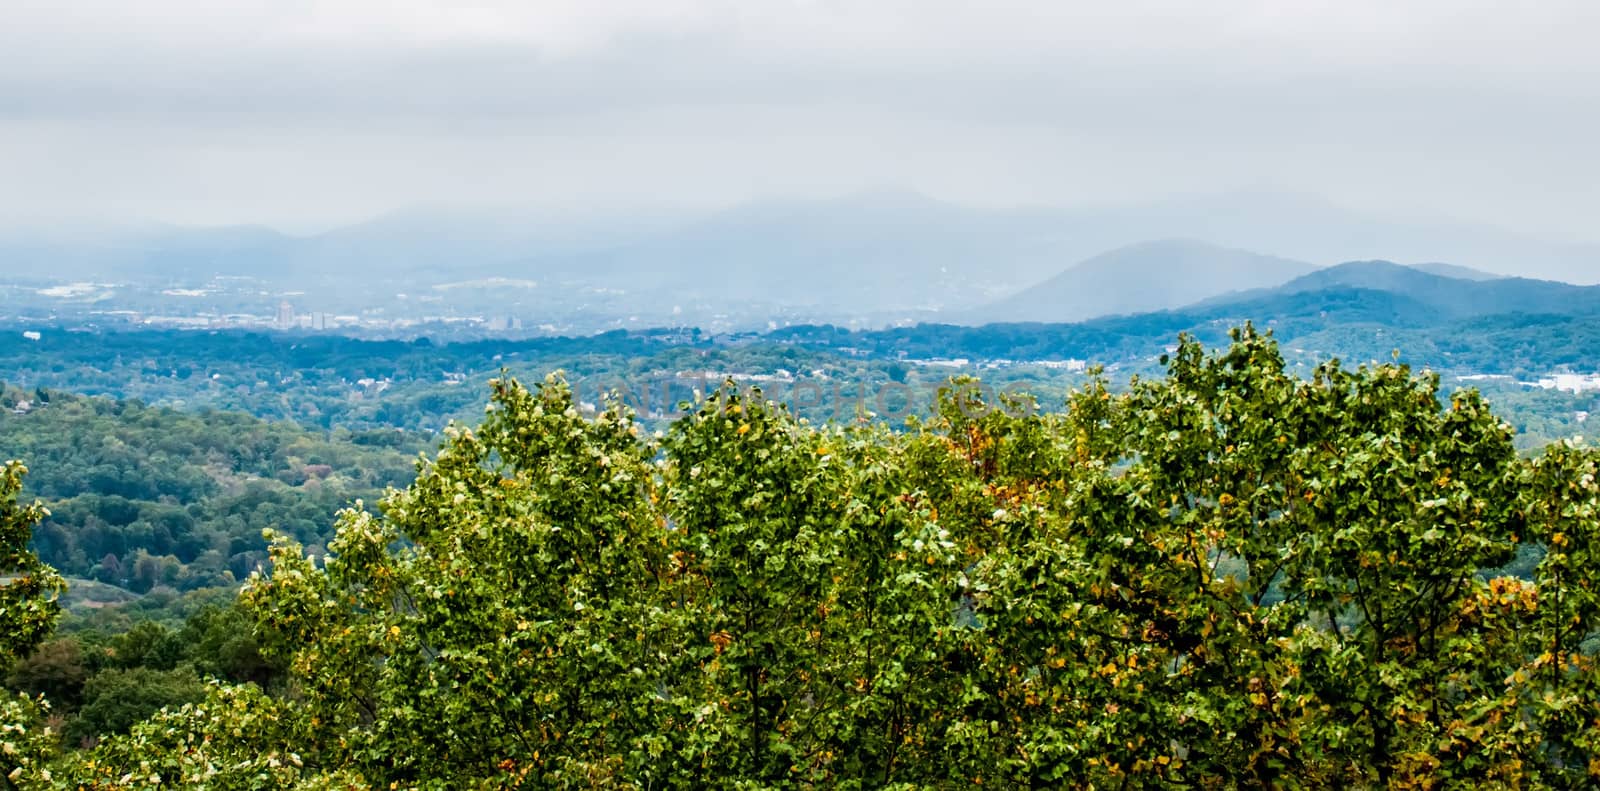 mountain landscapes in virginia state around roanoke  by digidreamgrafix